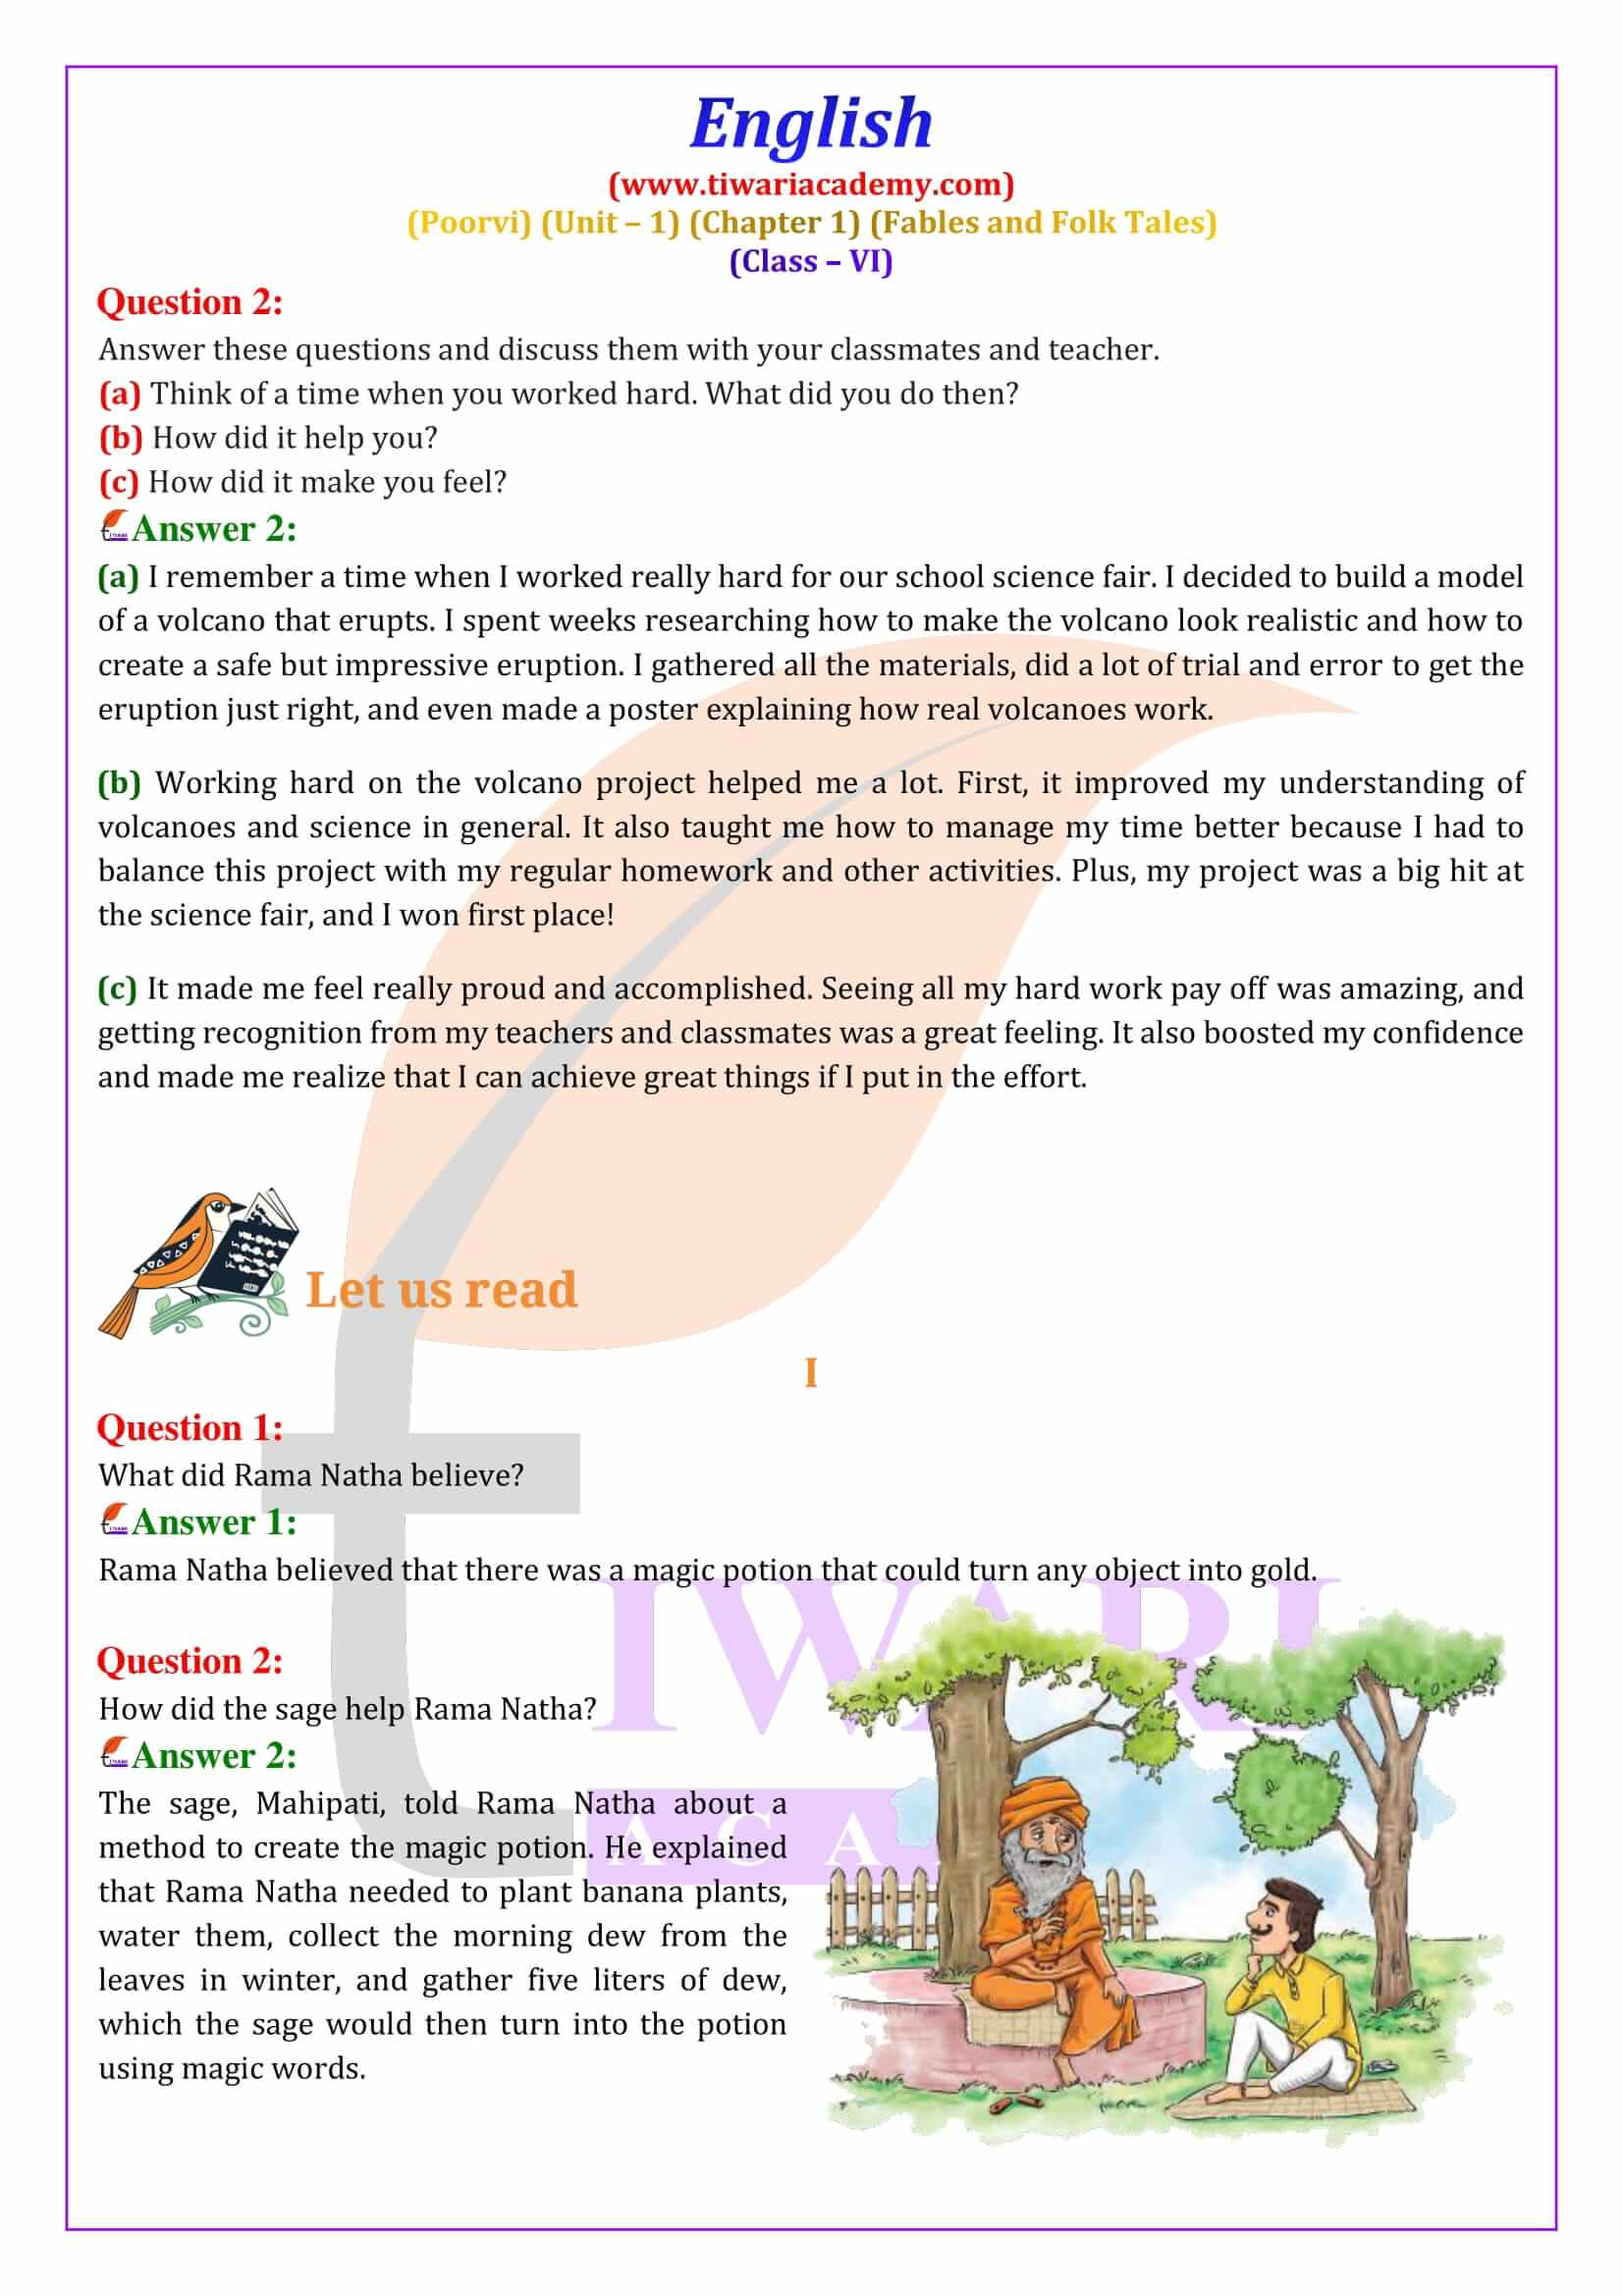 NCERT for Class 6 English Poorvi Unit 1 Fables and Folk Tales Chapter 1 A Bottle of Dew